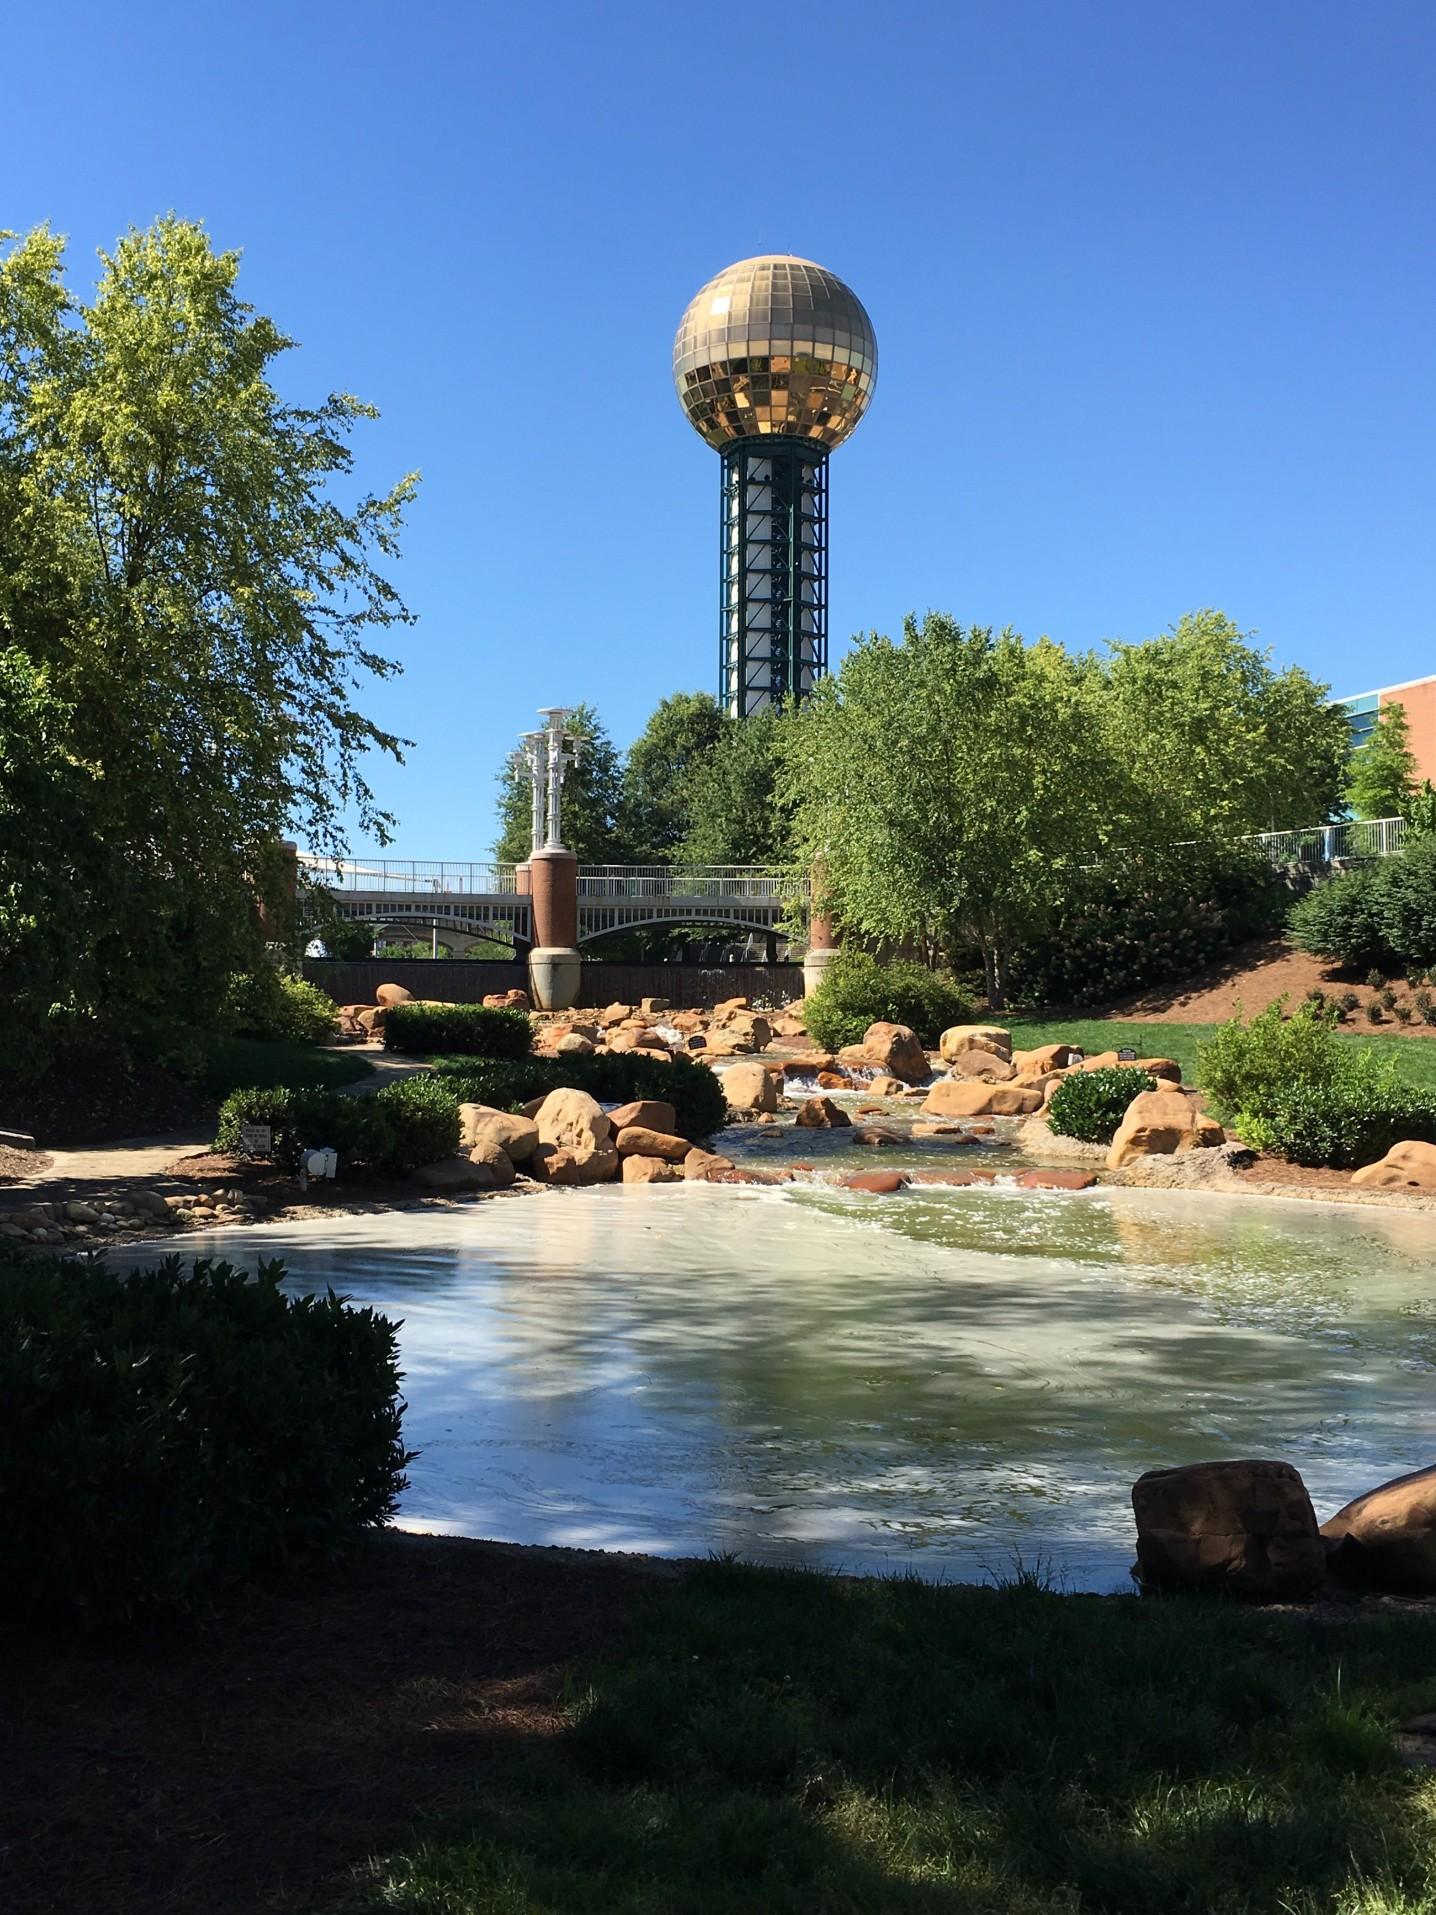 View of the Knoxville Sunsphere from a park.